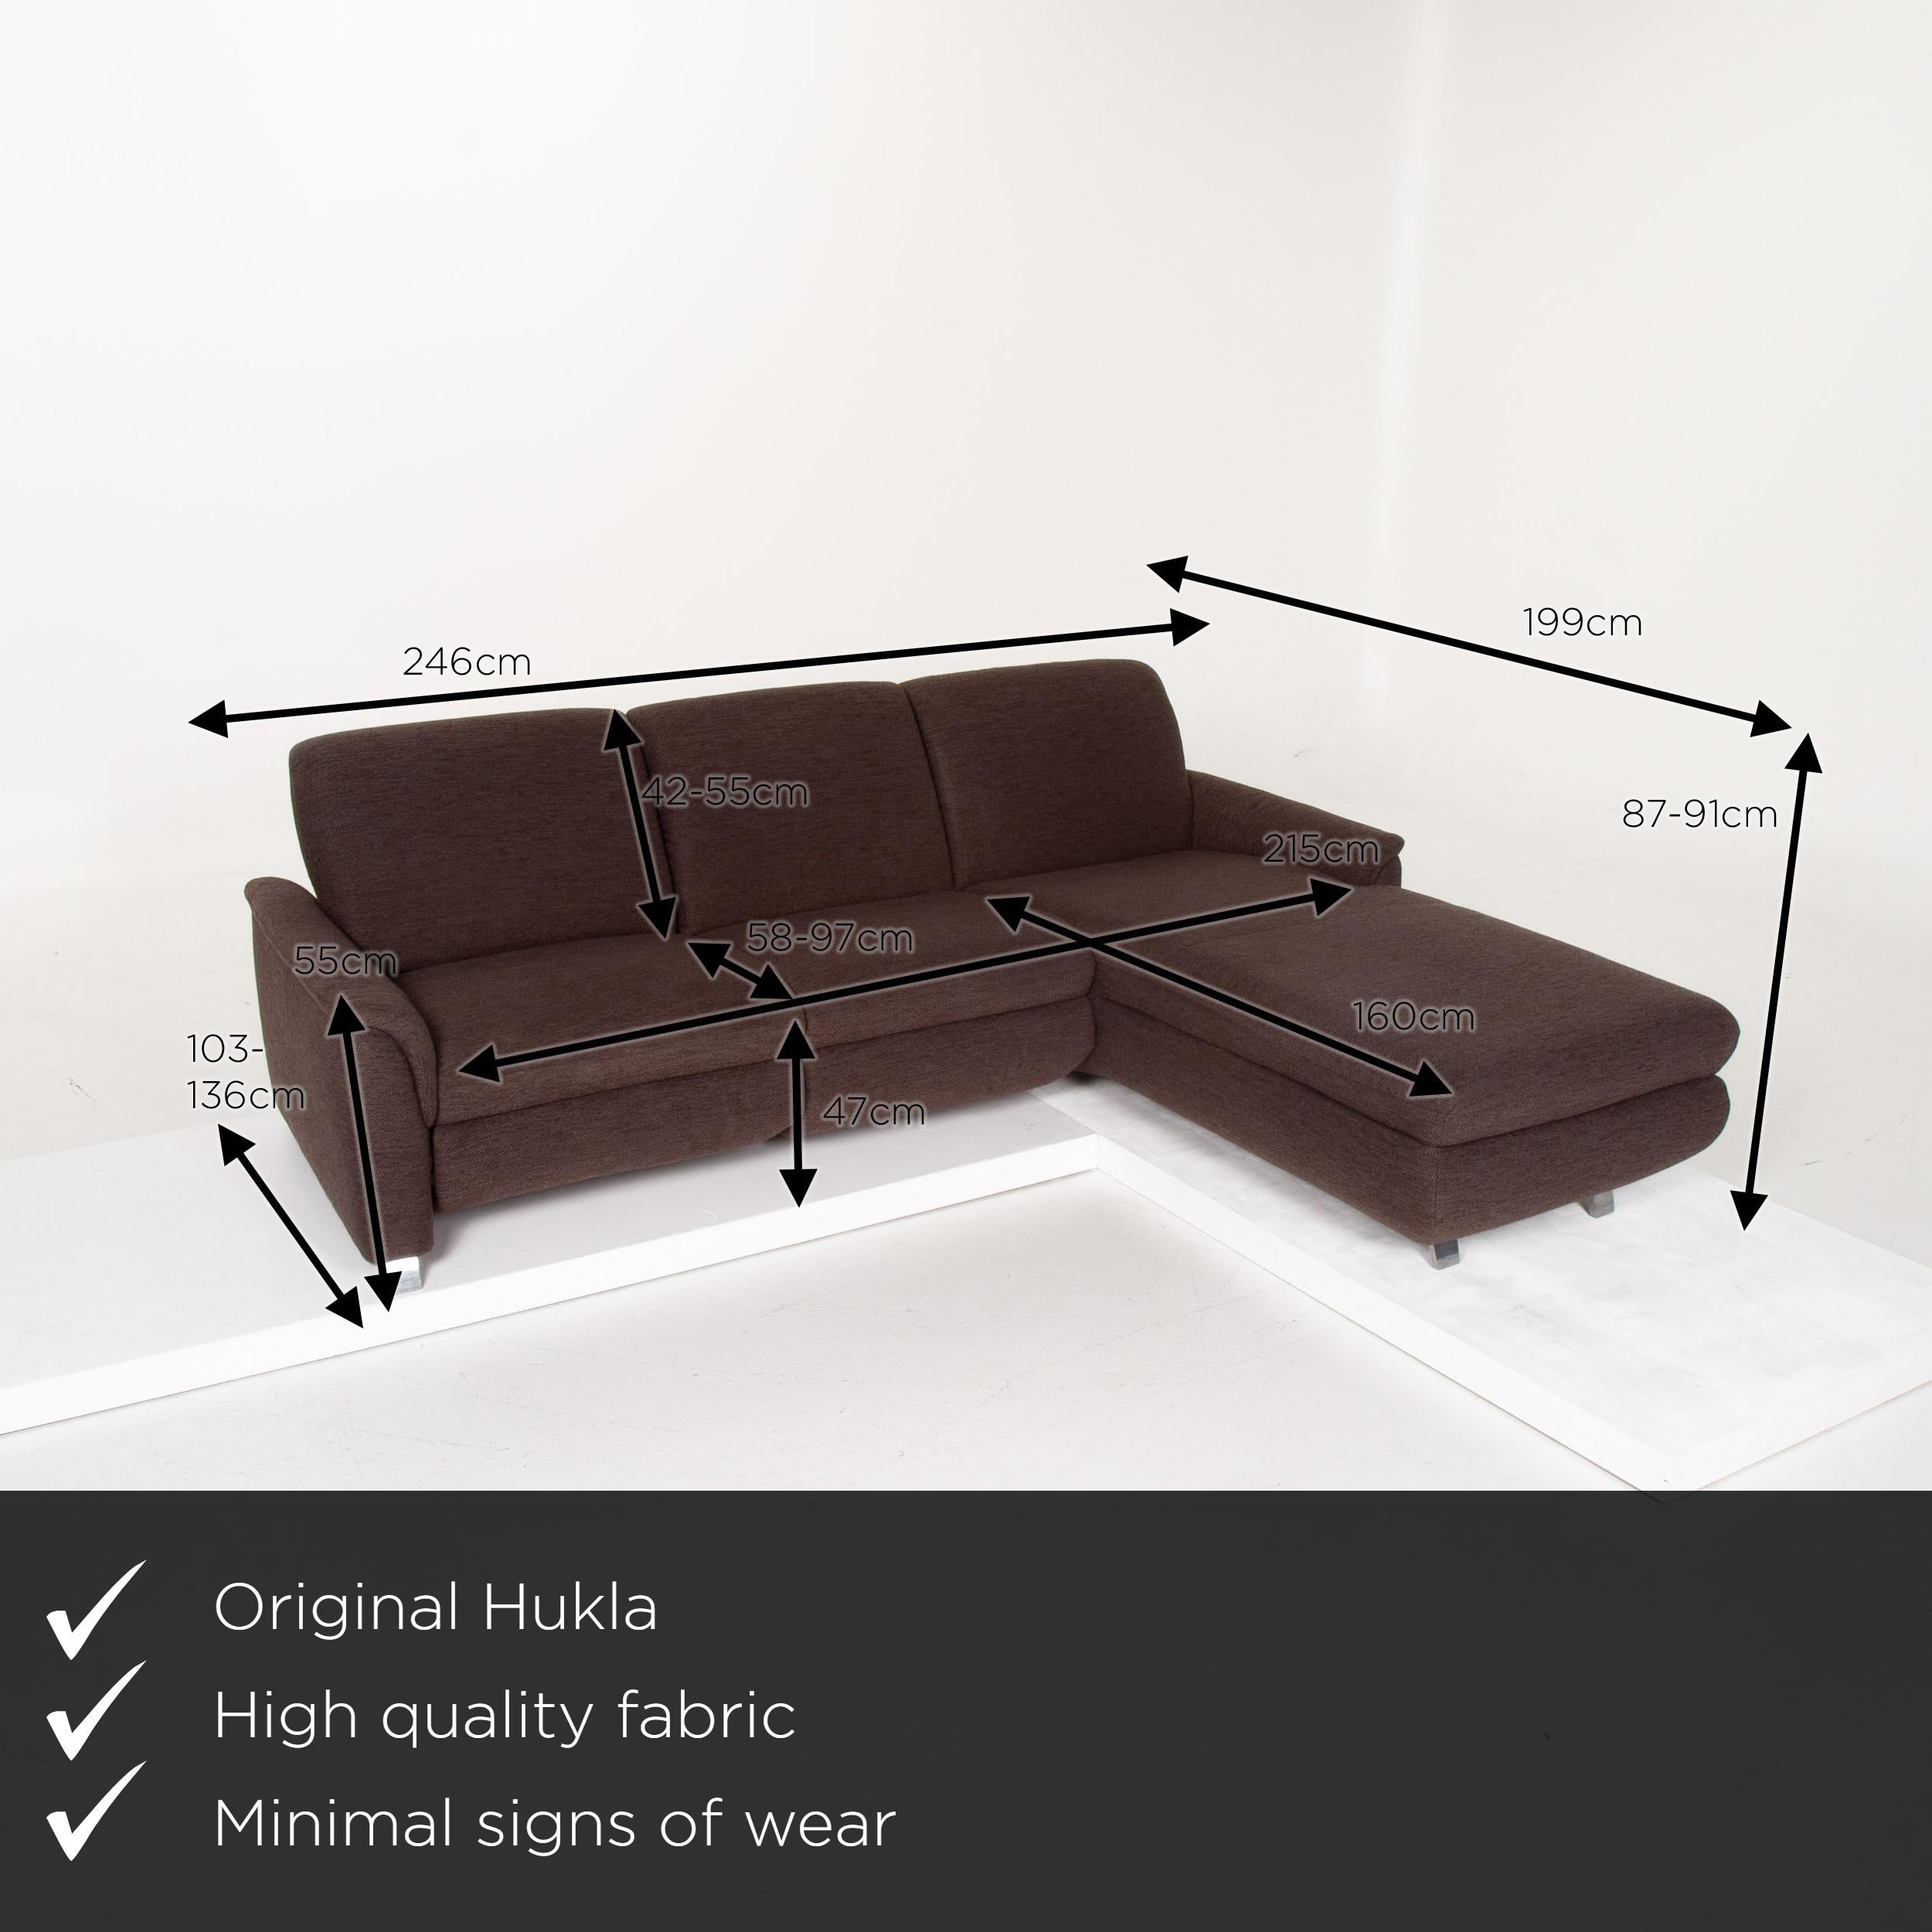 We present to you a Hukla fabric sofa brown corner sofa.

 

 Product measurements in centimeters:
 

Depth 103
Width 246
Height 87
Seat height 47
Rest height 55
Seat depth 58
Seat width 215
Back height 42.